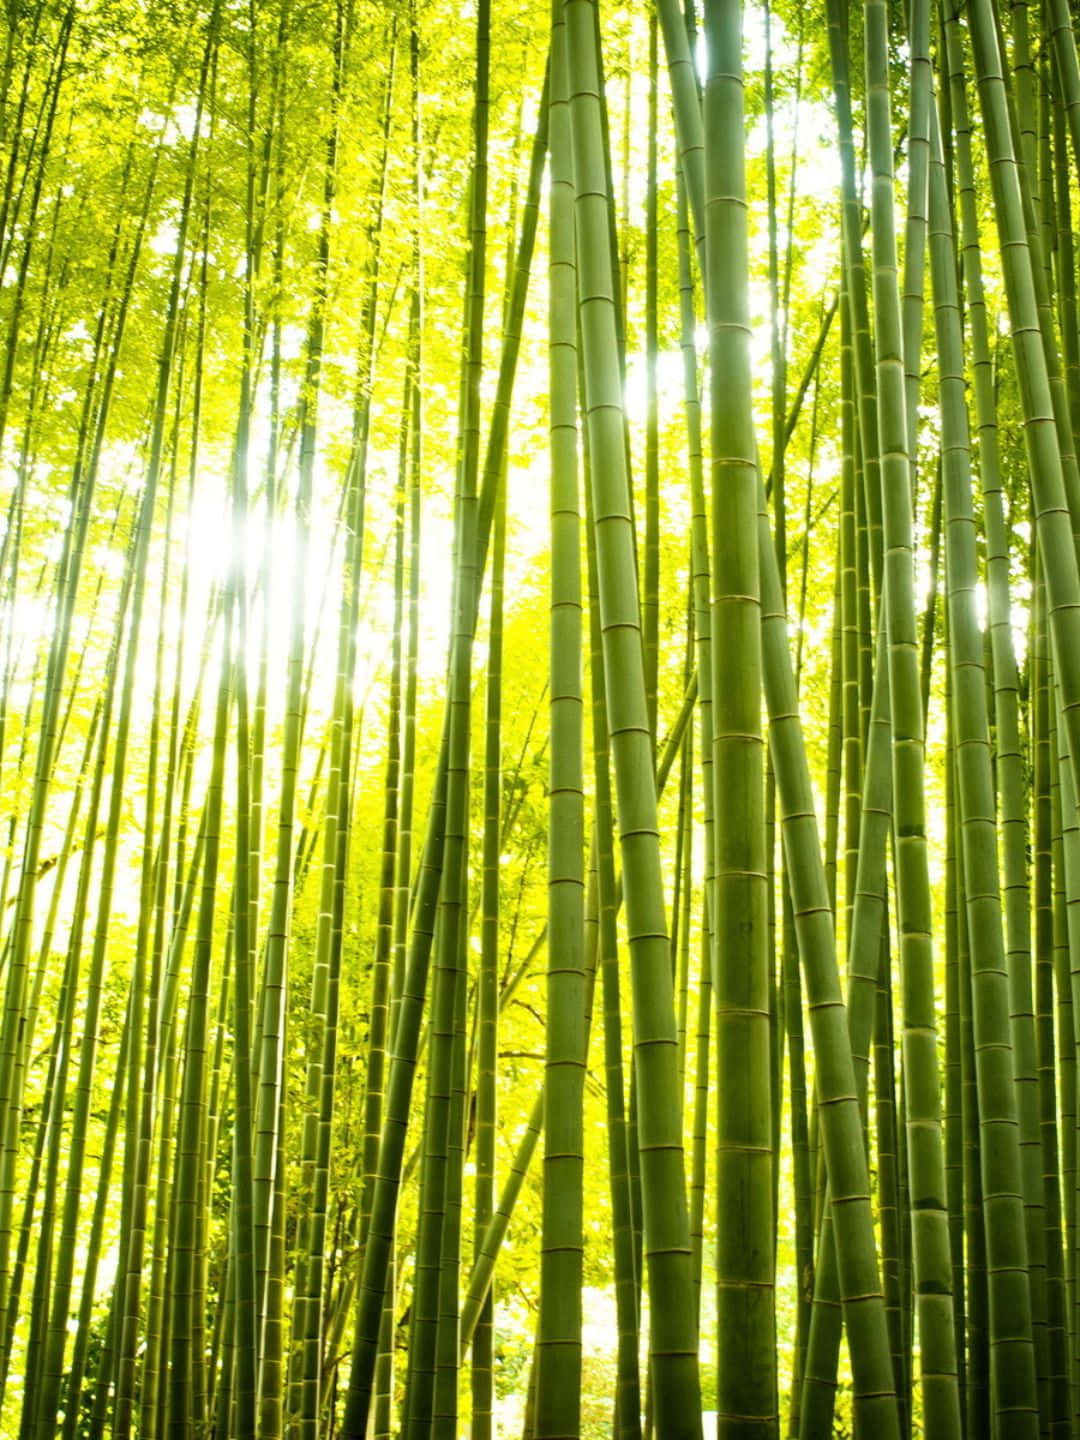 1440p Bamboo Background Bamboo Trees With A Bright Light